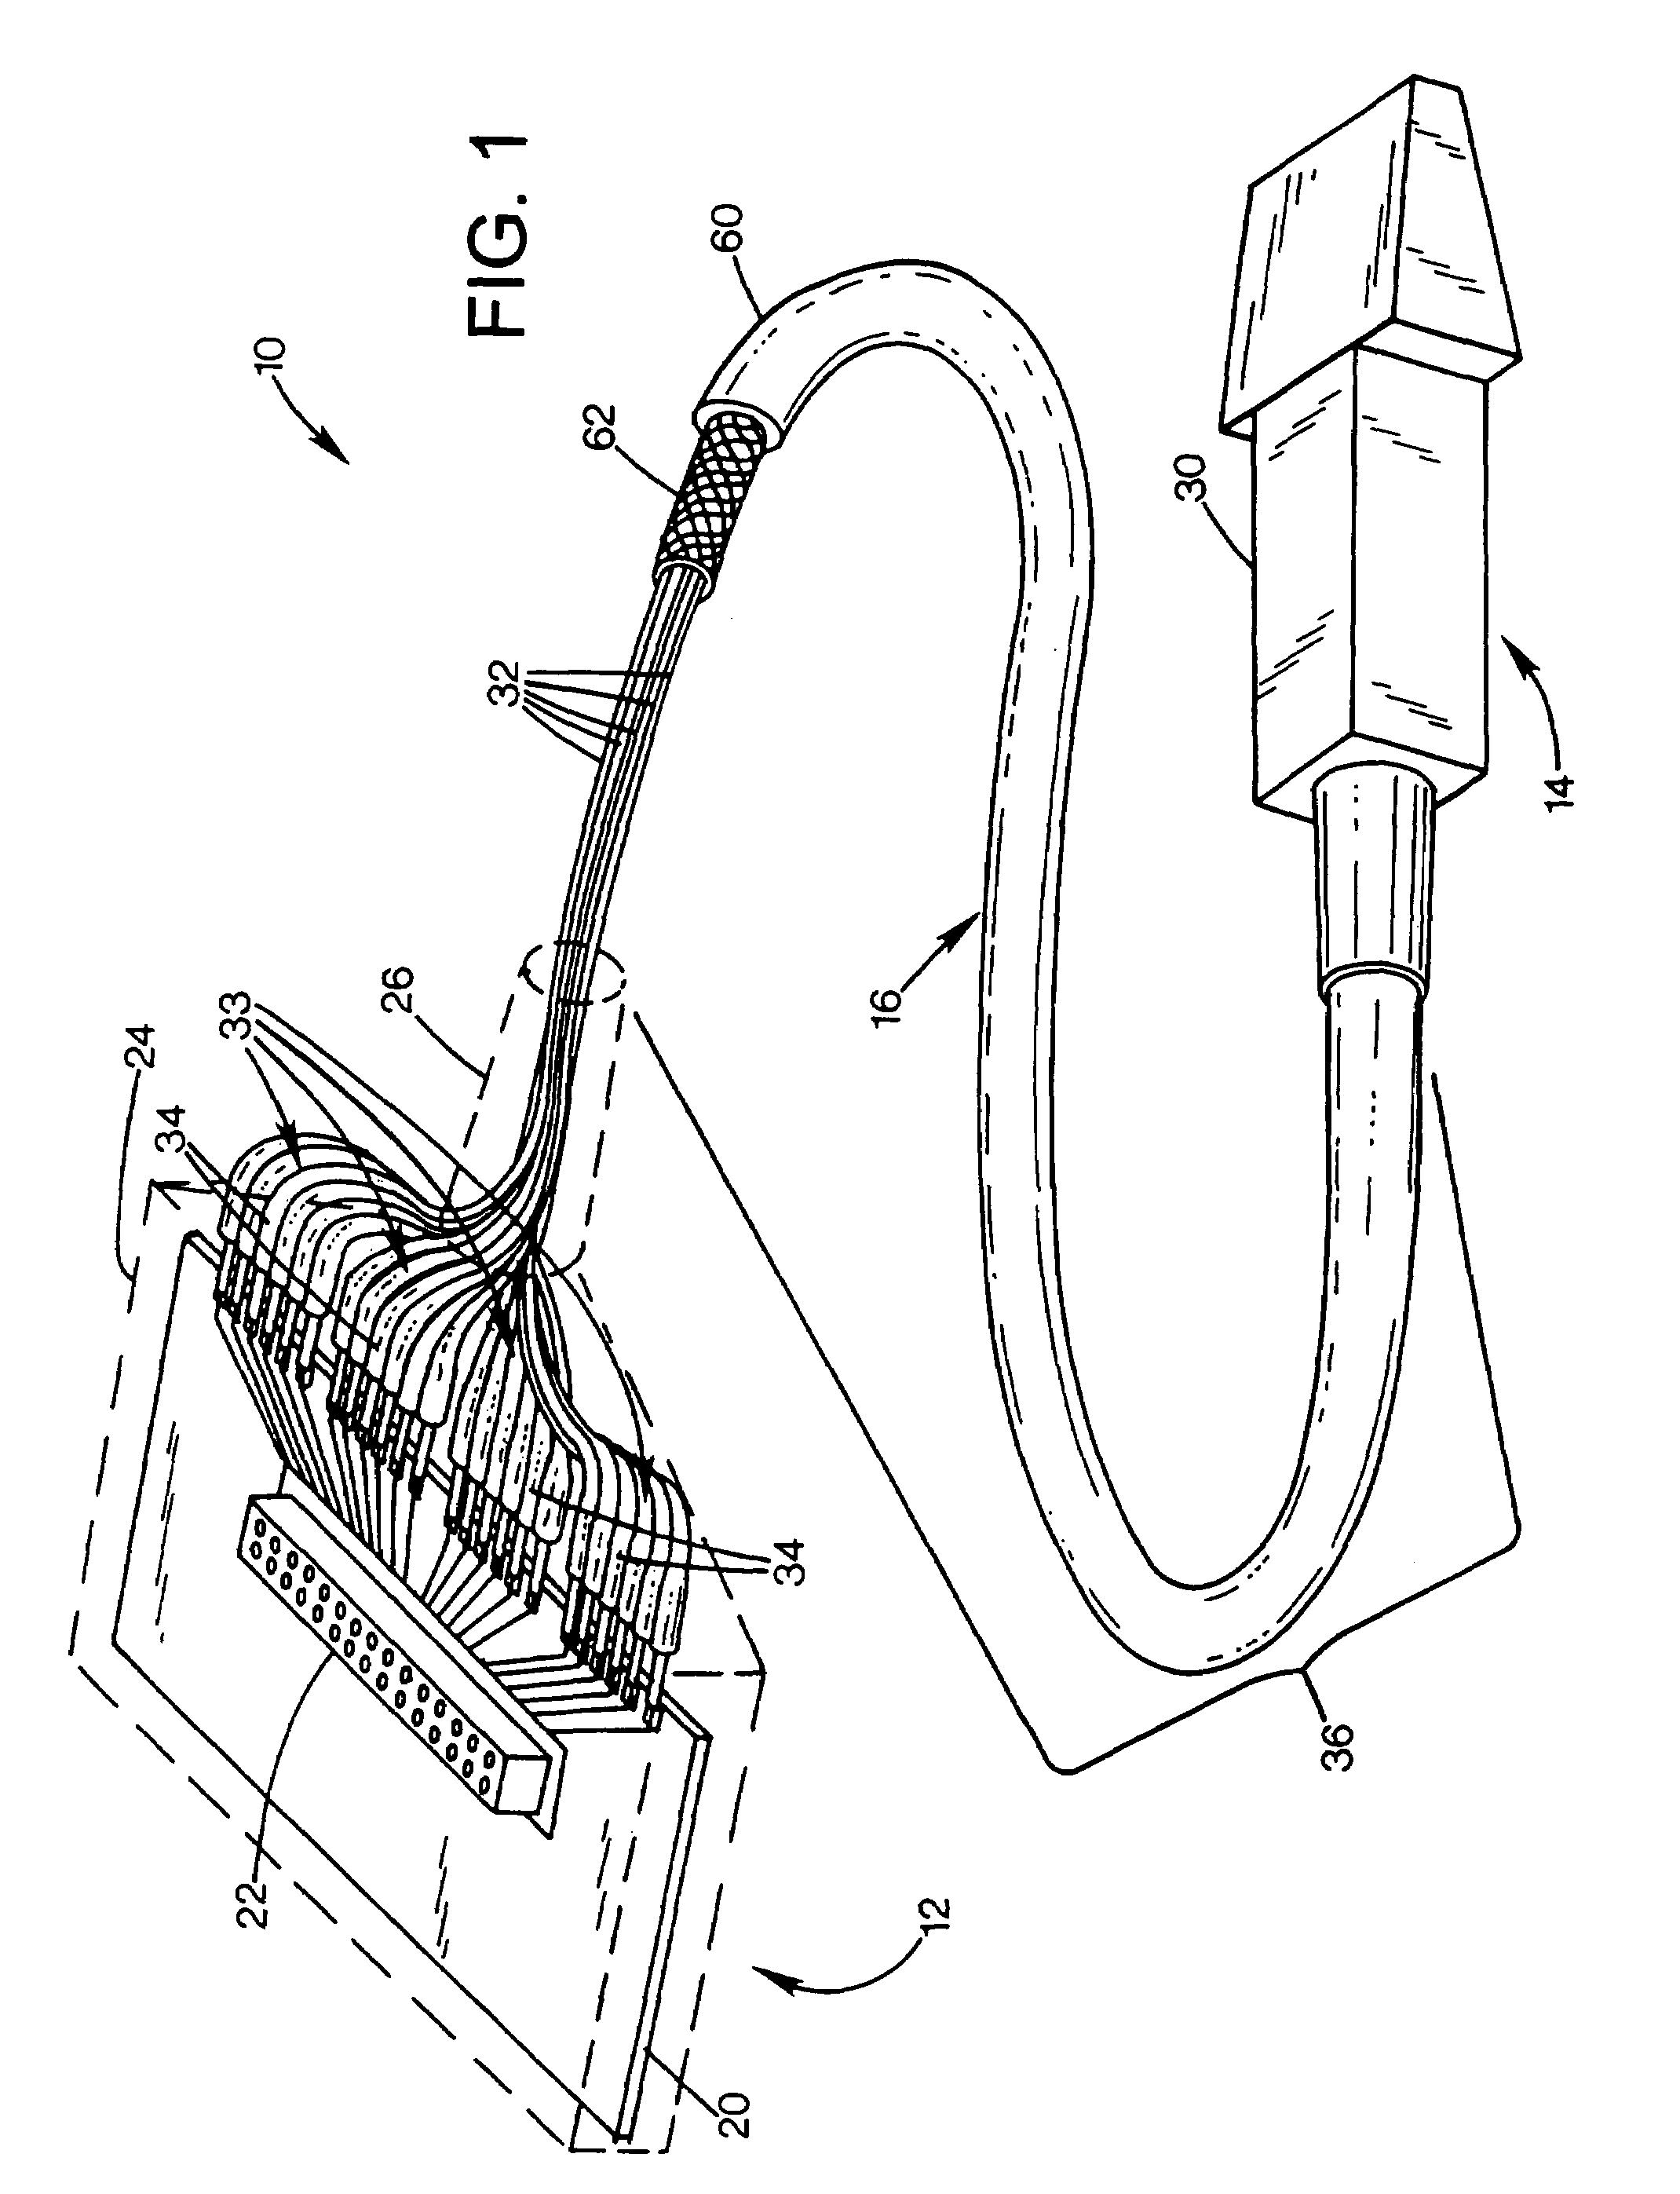 Flexible interconnect cable with insulated shield and method of manufacturing